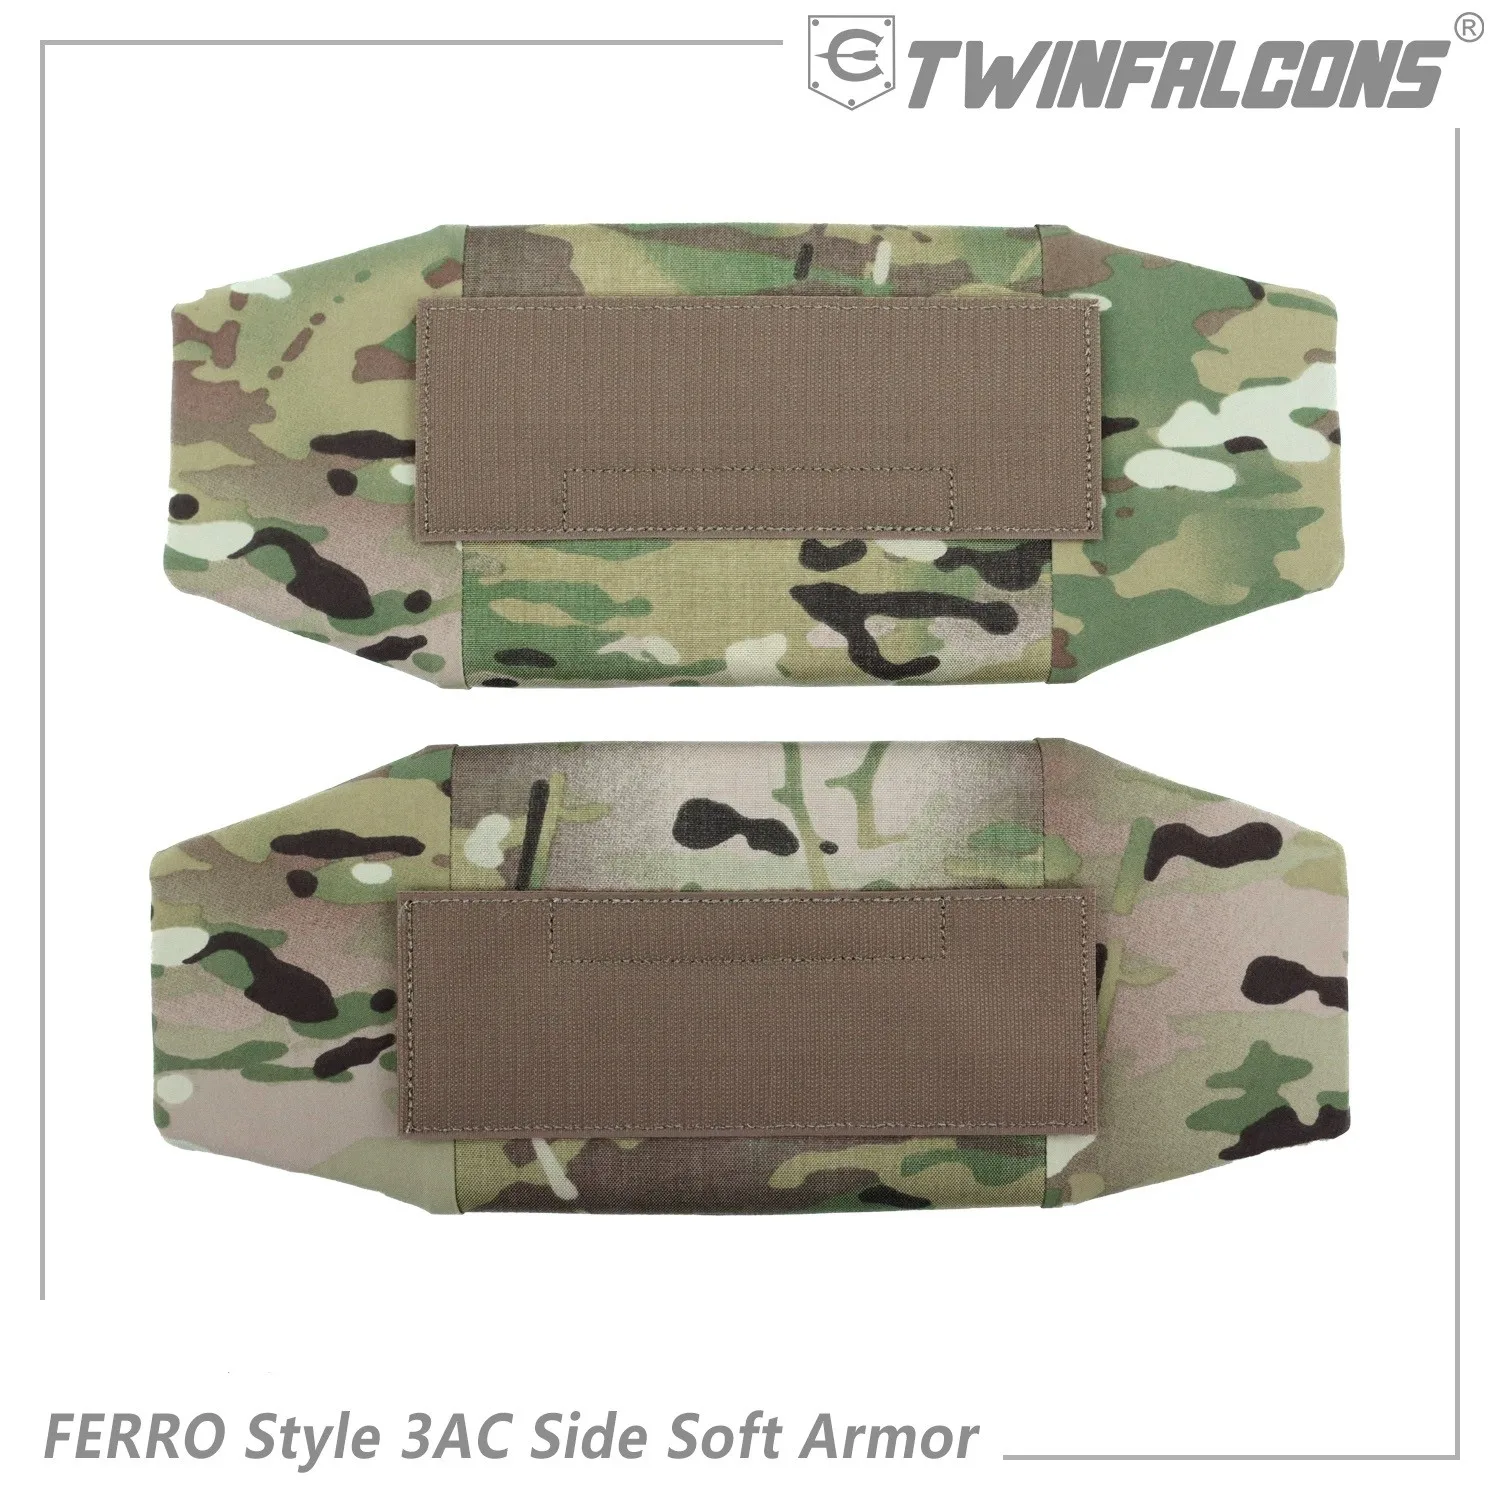 

TW-P154 Twinfalcons 3AC Side Armor Pouch With Model Soft Plate For FCPC V5 AOR1 Multicam Airsoft Wargame Milsim Ferro